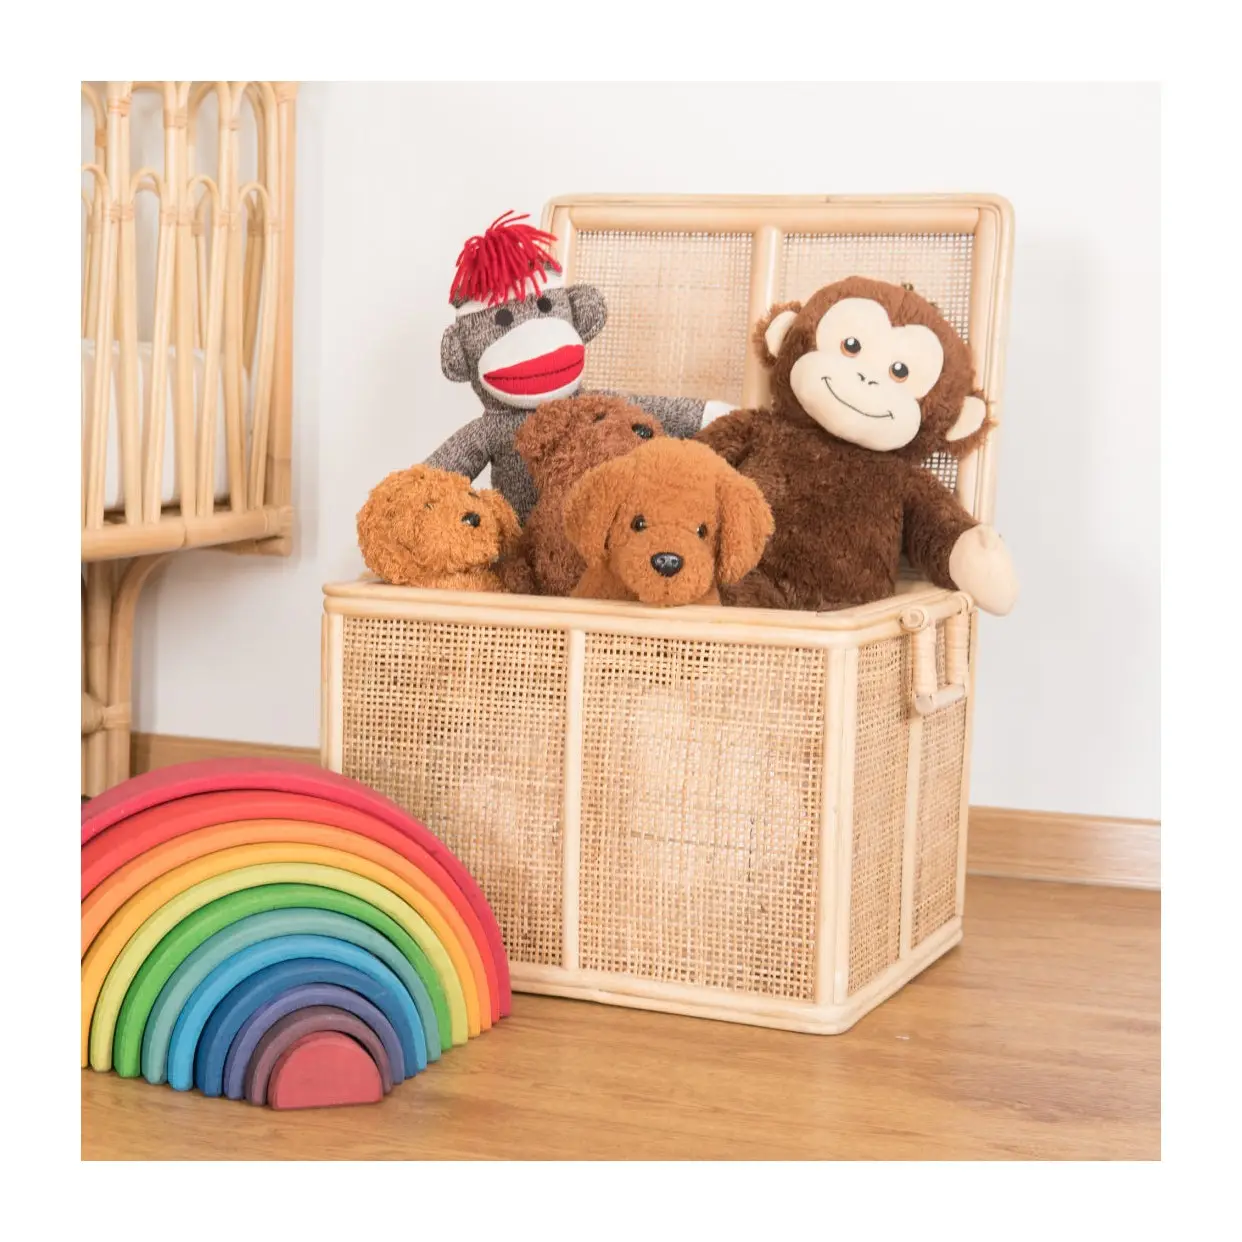 Latest design premium quality wicker woven hand made box trunks chest of drawers for kids rattan luggage trunk